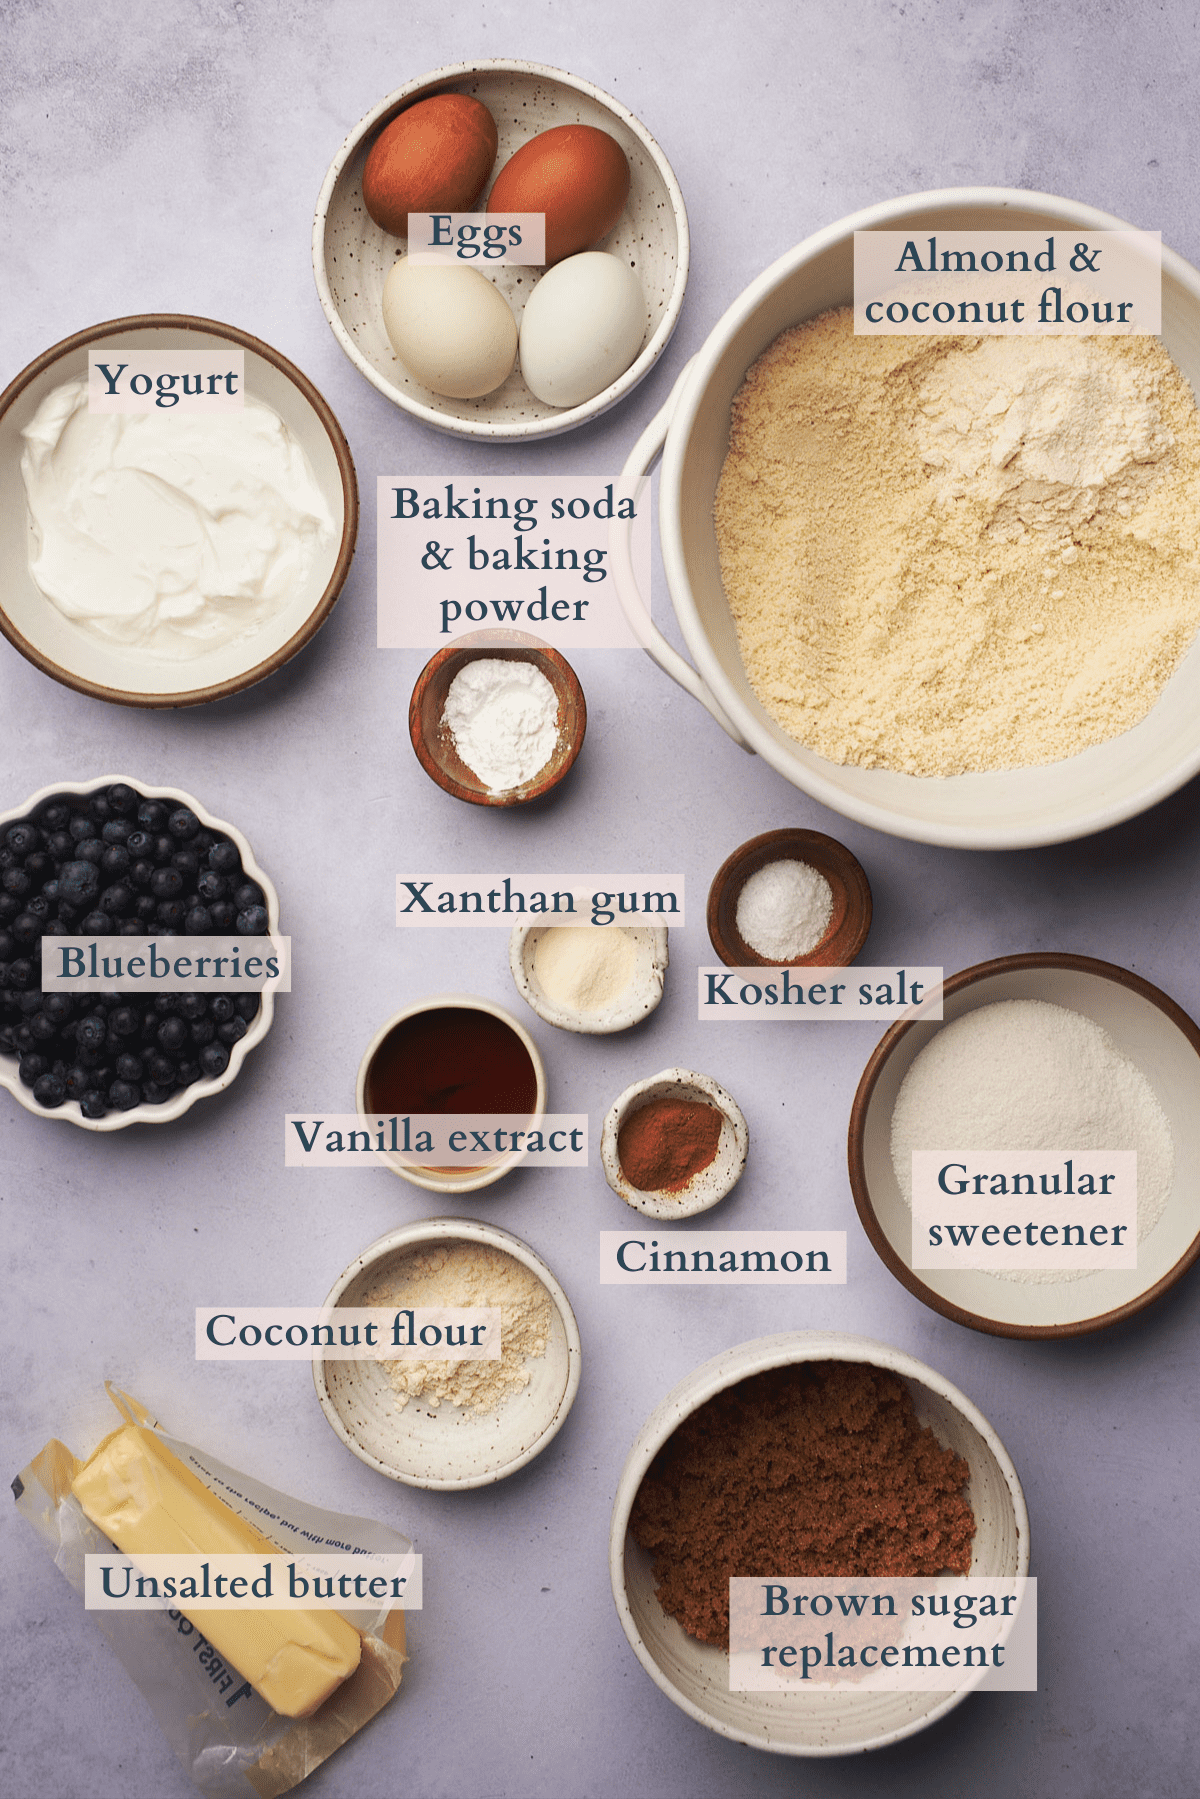 keto blueberry muffins ingredients graphic with text to denote each ingredient, including almond flour, coconut flour, blueberries, unsalted butter, eggs, yogurt, xanthan gum, baking soda, baking powder, kosher salt, vanilla extract, cinnamon, brown sugar replacement, and a granular sugar replacement., 